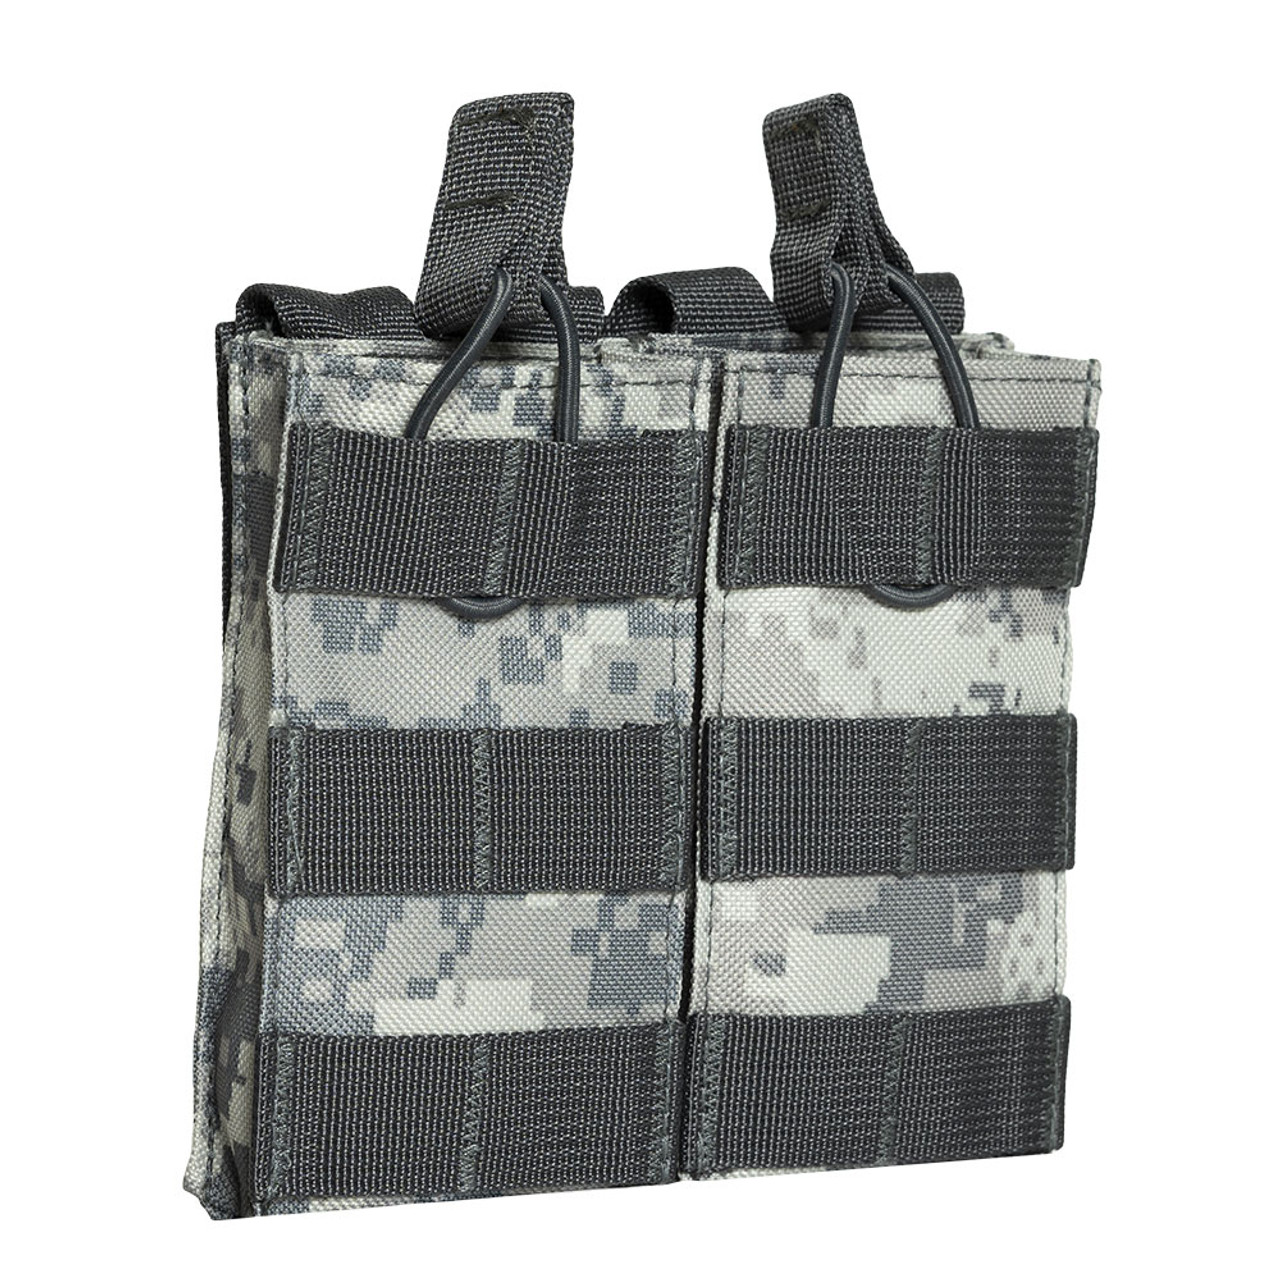 NcSTAR CVAR2MP3040D MOLLE Double Mag Pouch Holds 2 223/556 30 Round Magazines